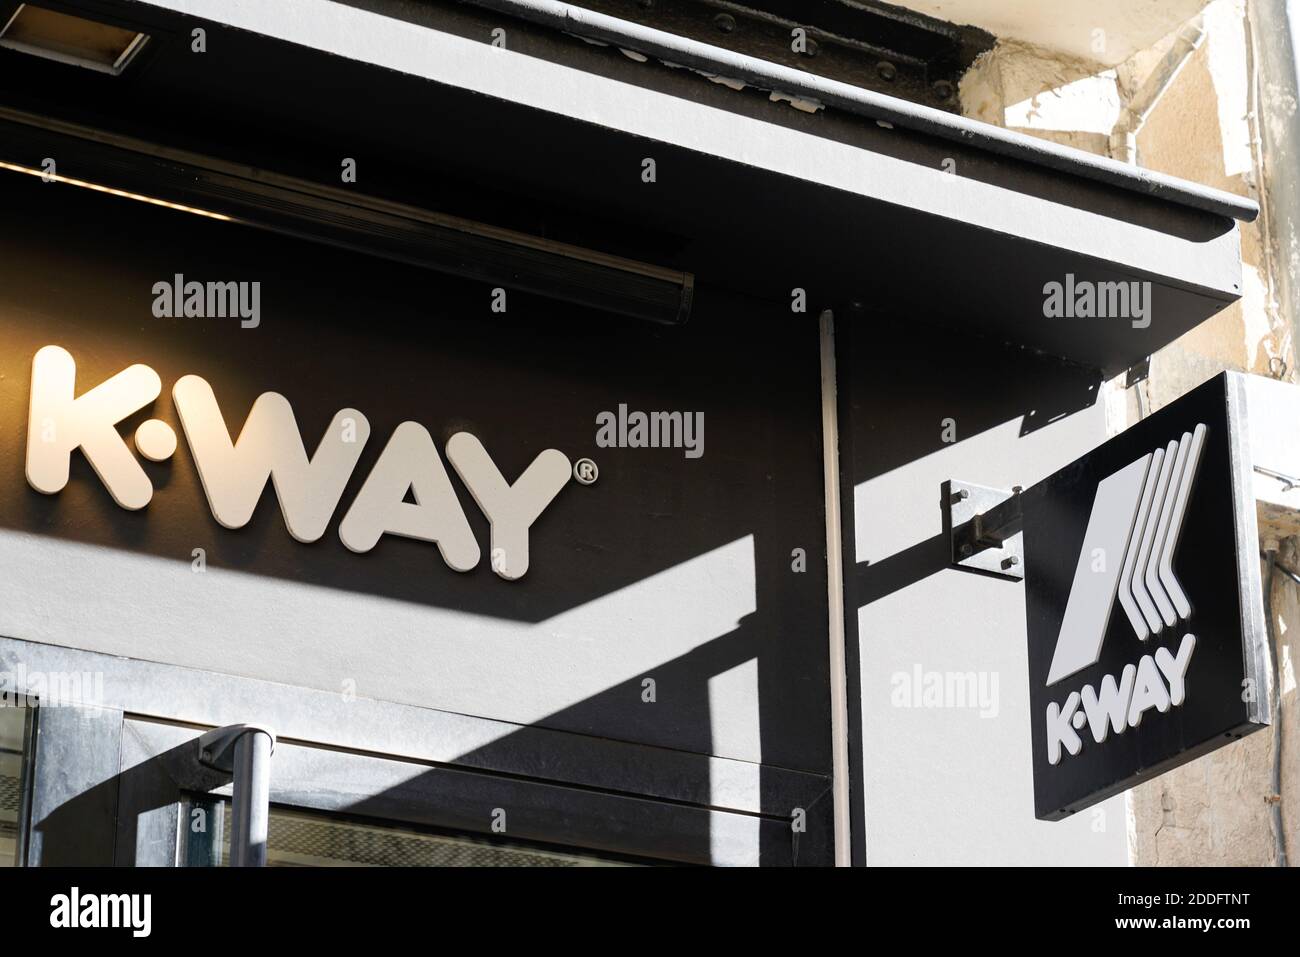 Bordeaux , Aquitaine / France - 11 08 2020 : k-way logo and text sign front of french store clothing outlet raincoat and clothes rainproof shop Stock Photo